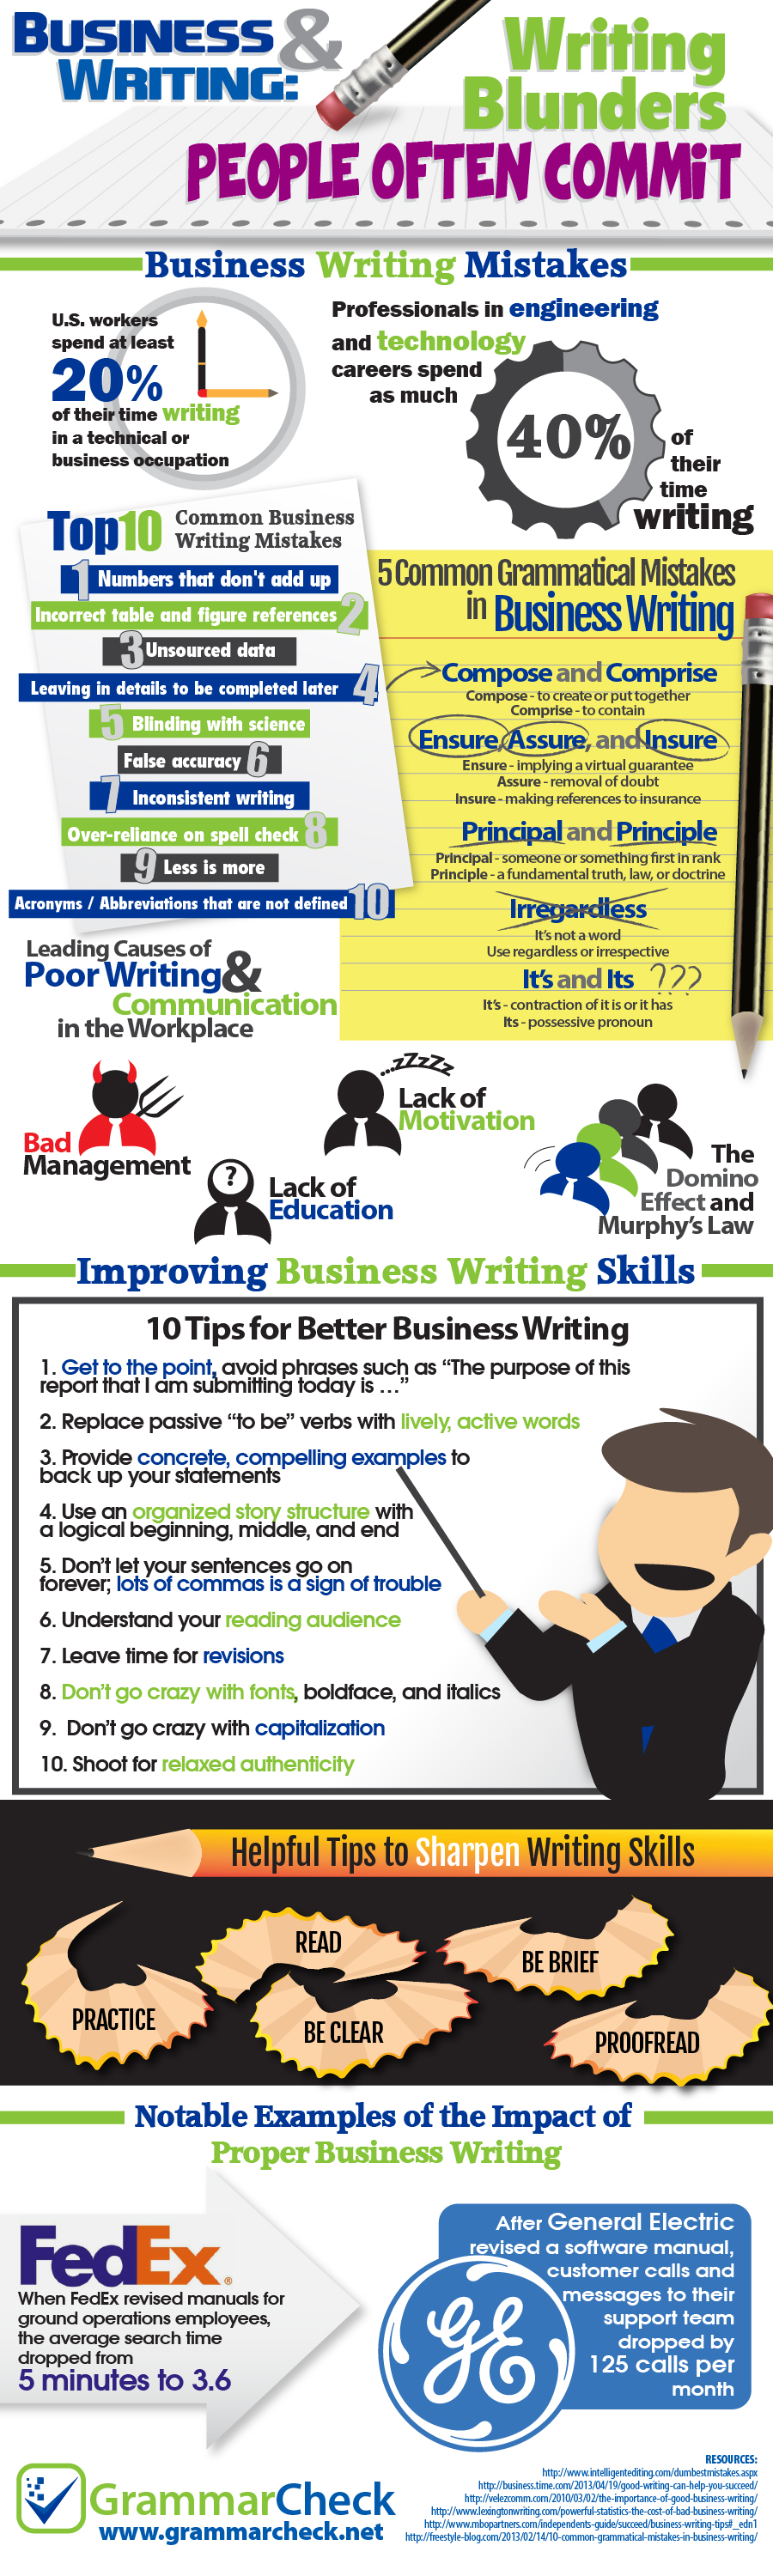 Top 10 Common Business Writing Blunders & 5 Everyday Grammatical Mistakes (Infographic)